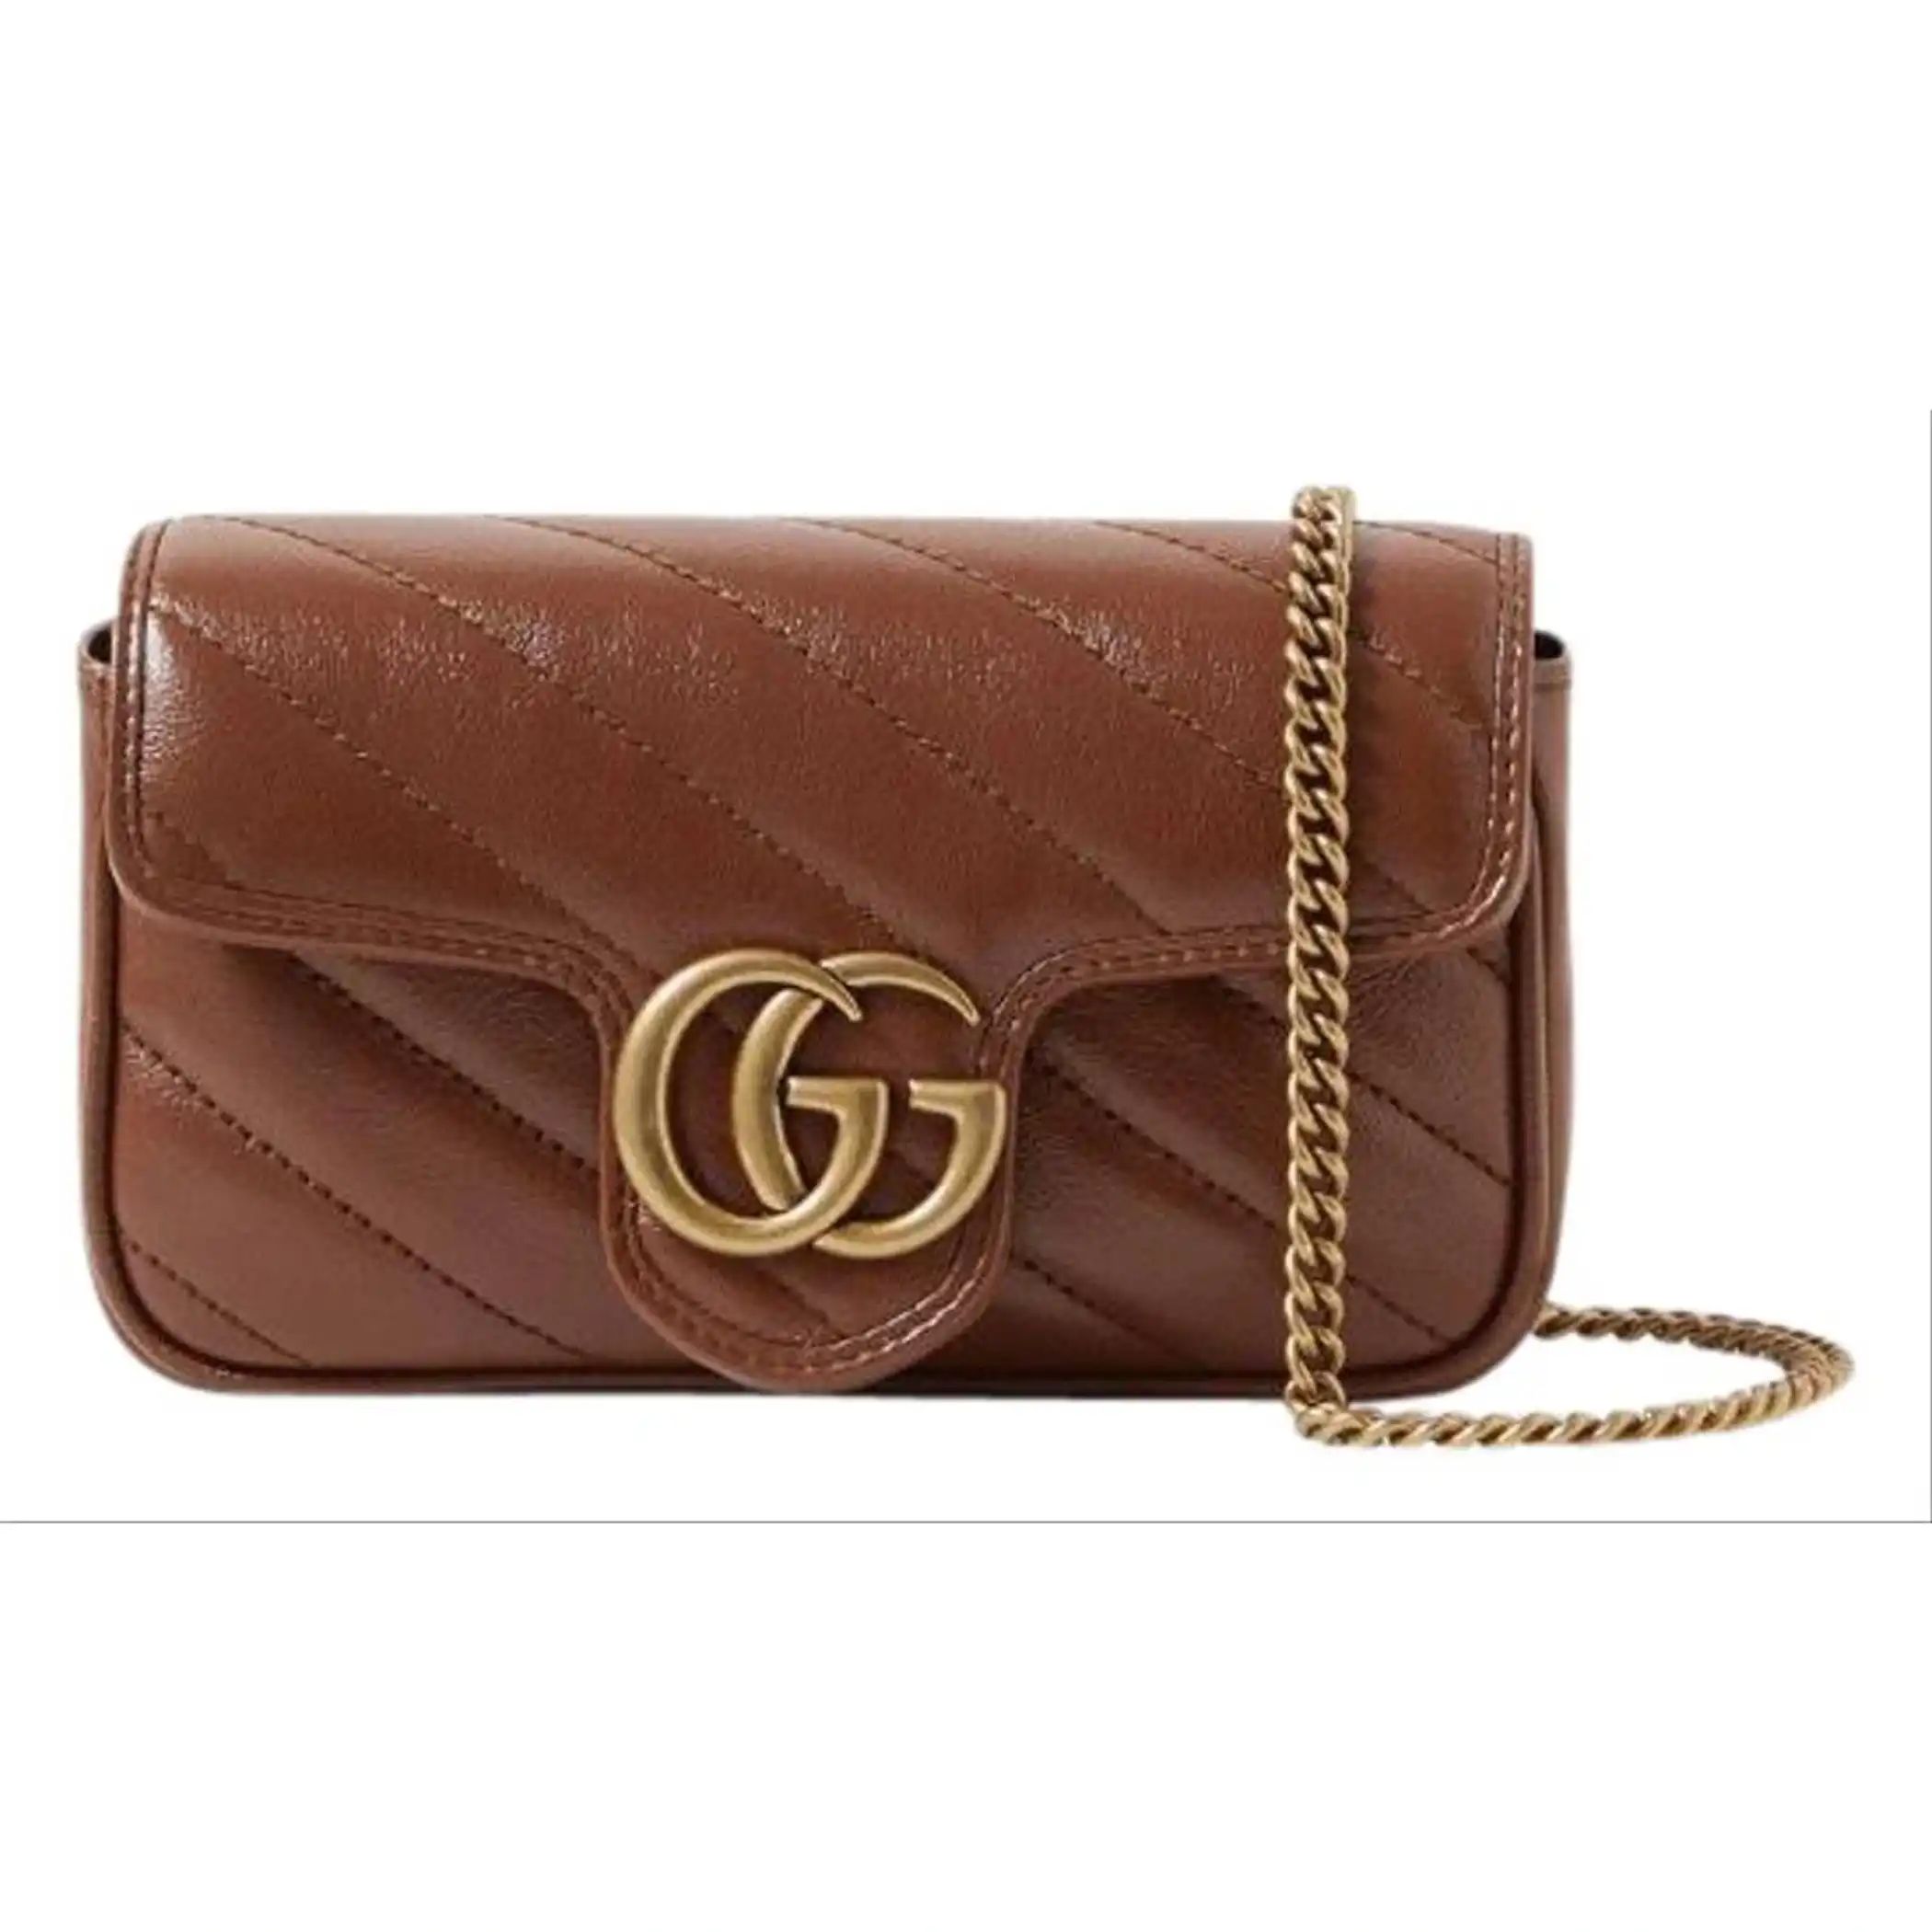 Gucci Marmont gg logo super mini quilted leather bag | Grailed | Grailed